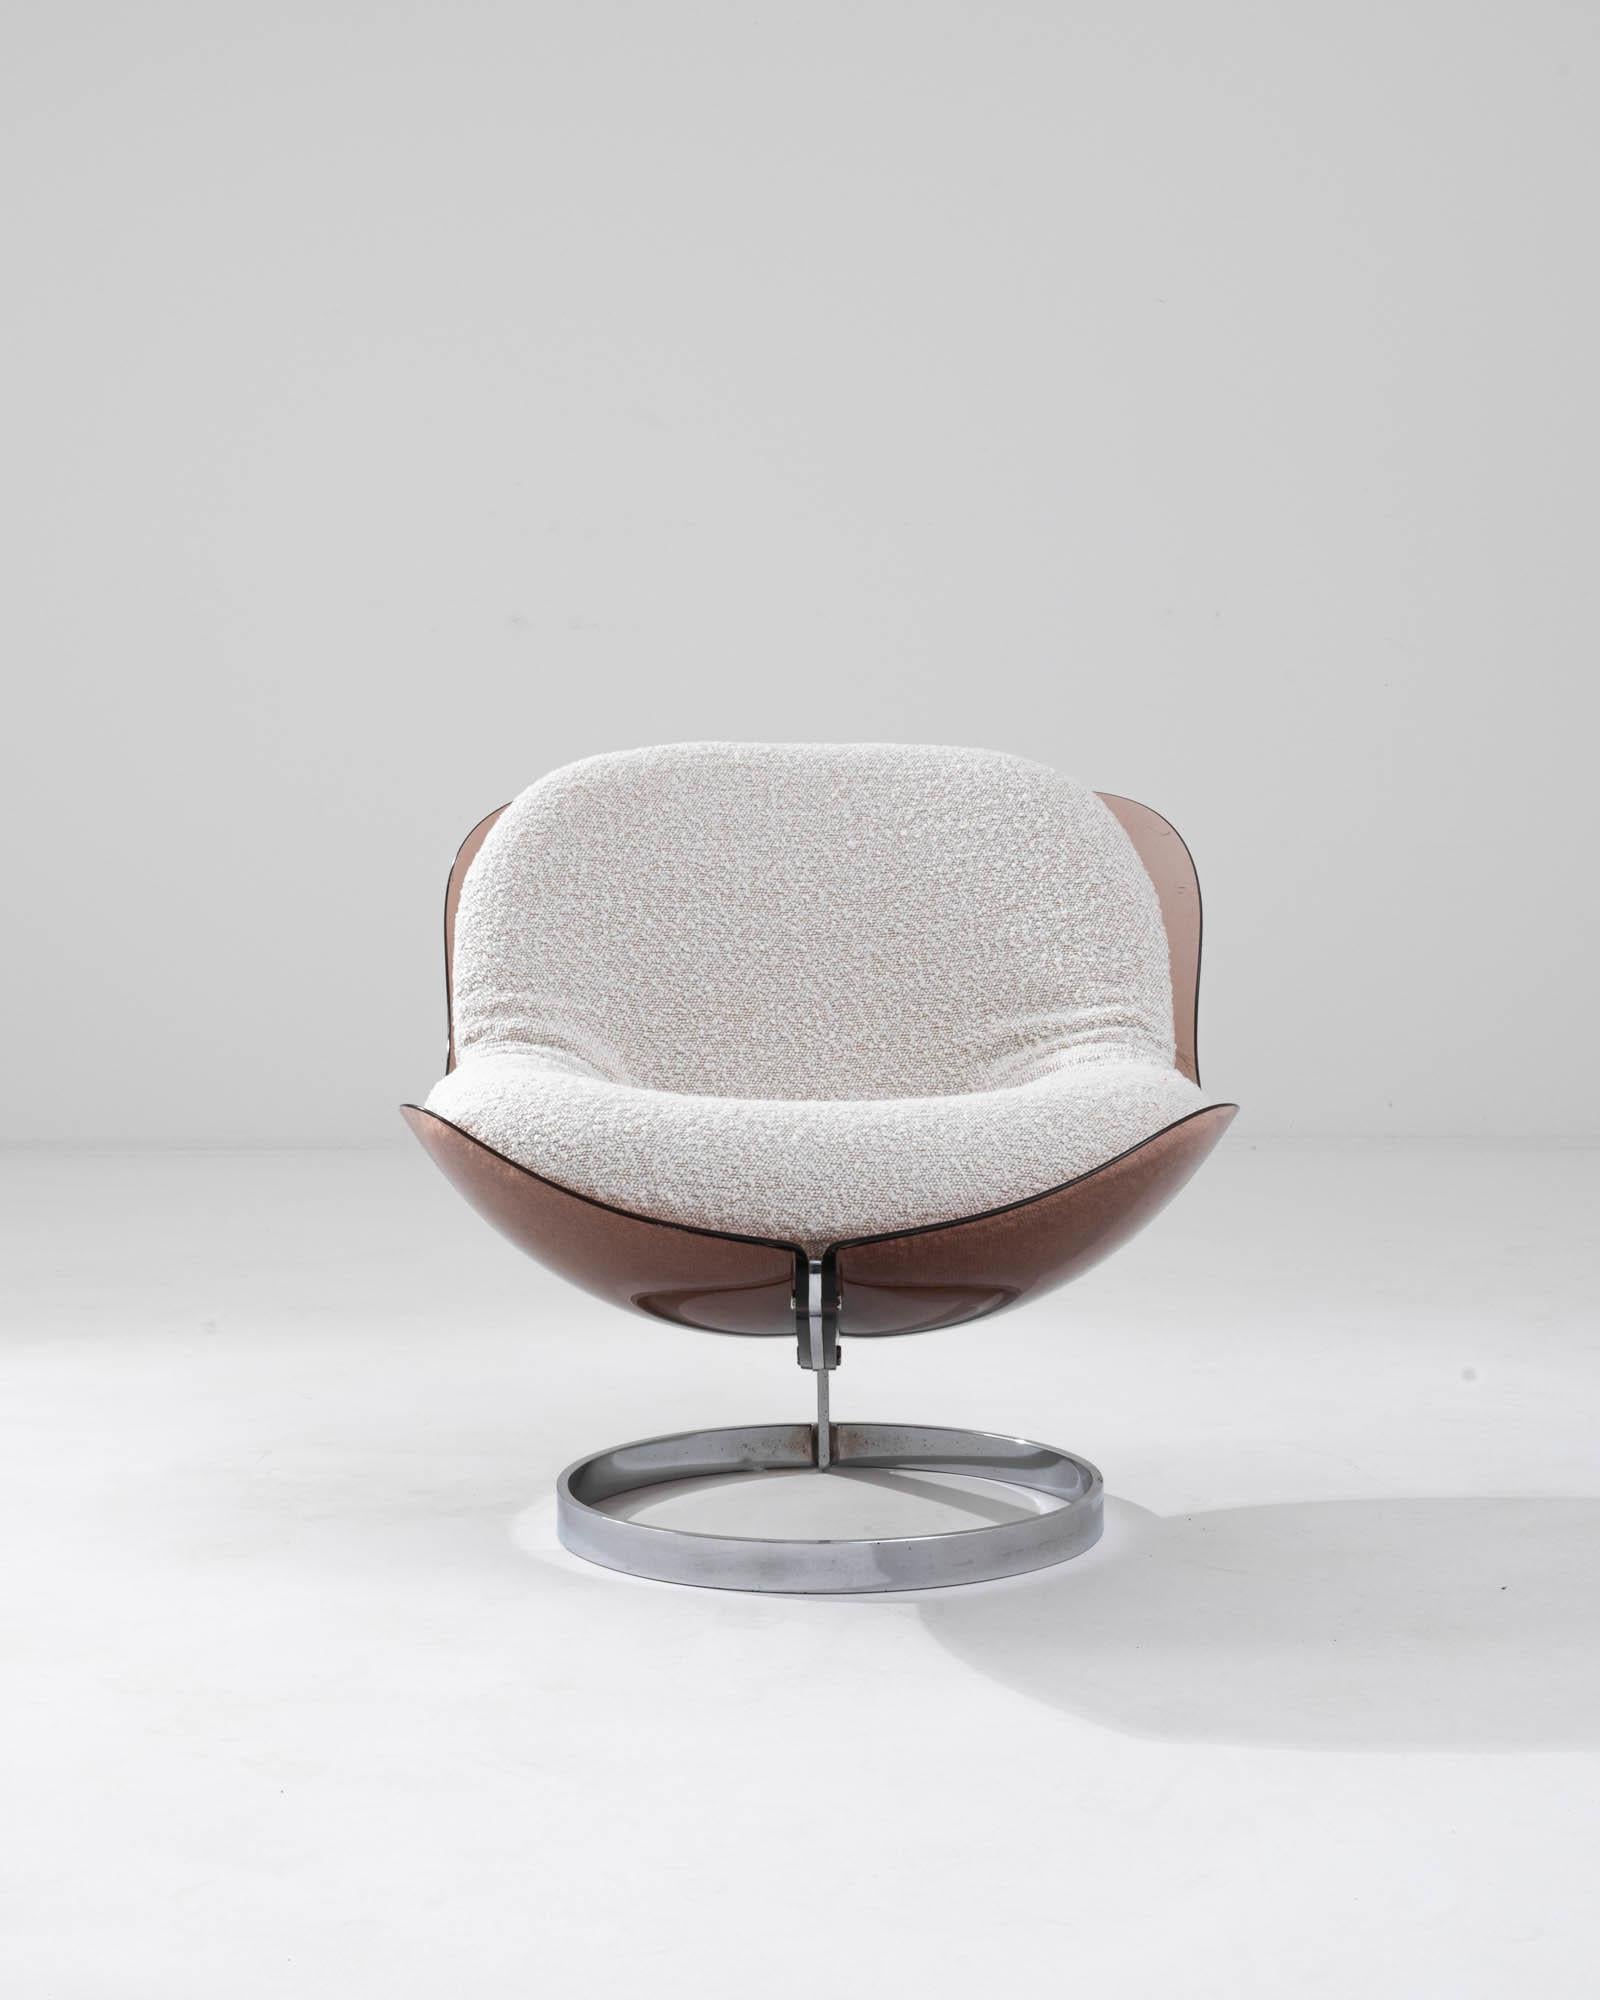 An upholstered metal and plexiglass “Sphere” chair designed by Boris Tabacoff, circa 1971. Raised above a chrome metal base, sumptuously curved smoked plexiglass cradles a plush boucle upholstered cushion. The sleek futuristic design is a staple of